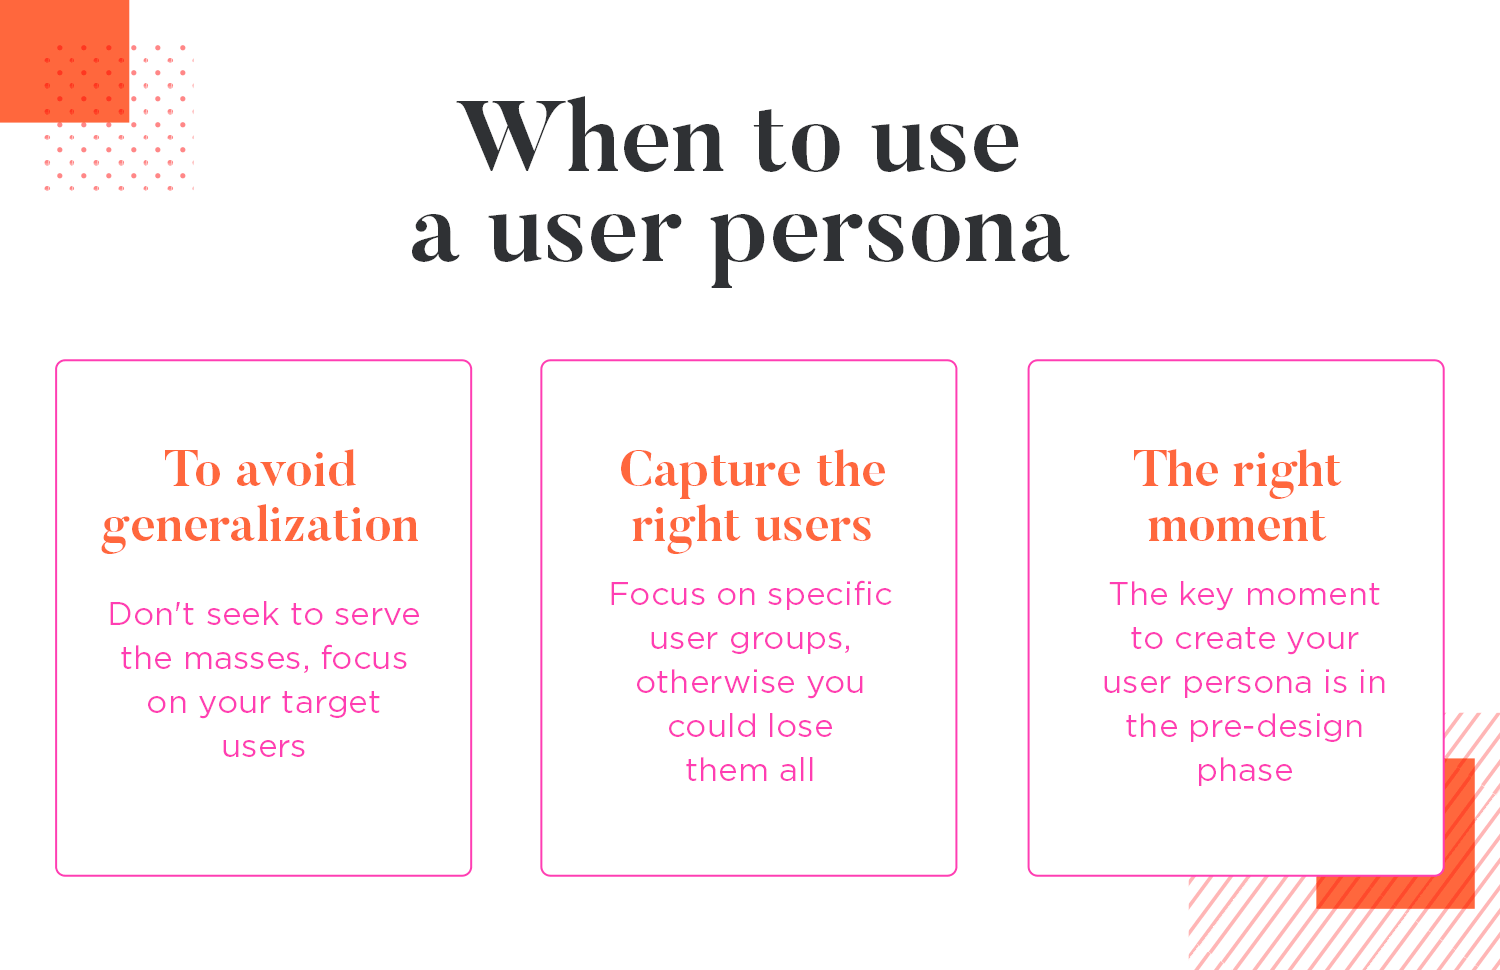 When to use a user persona